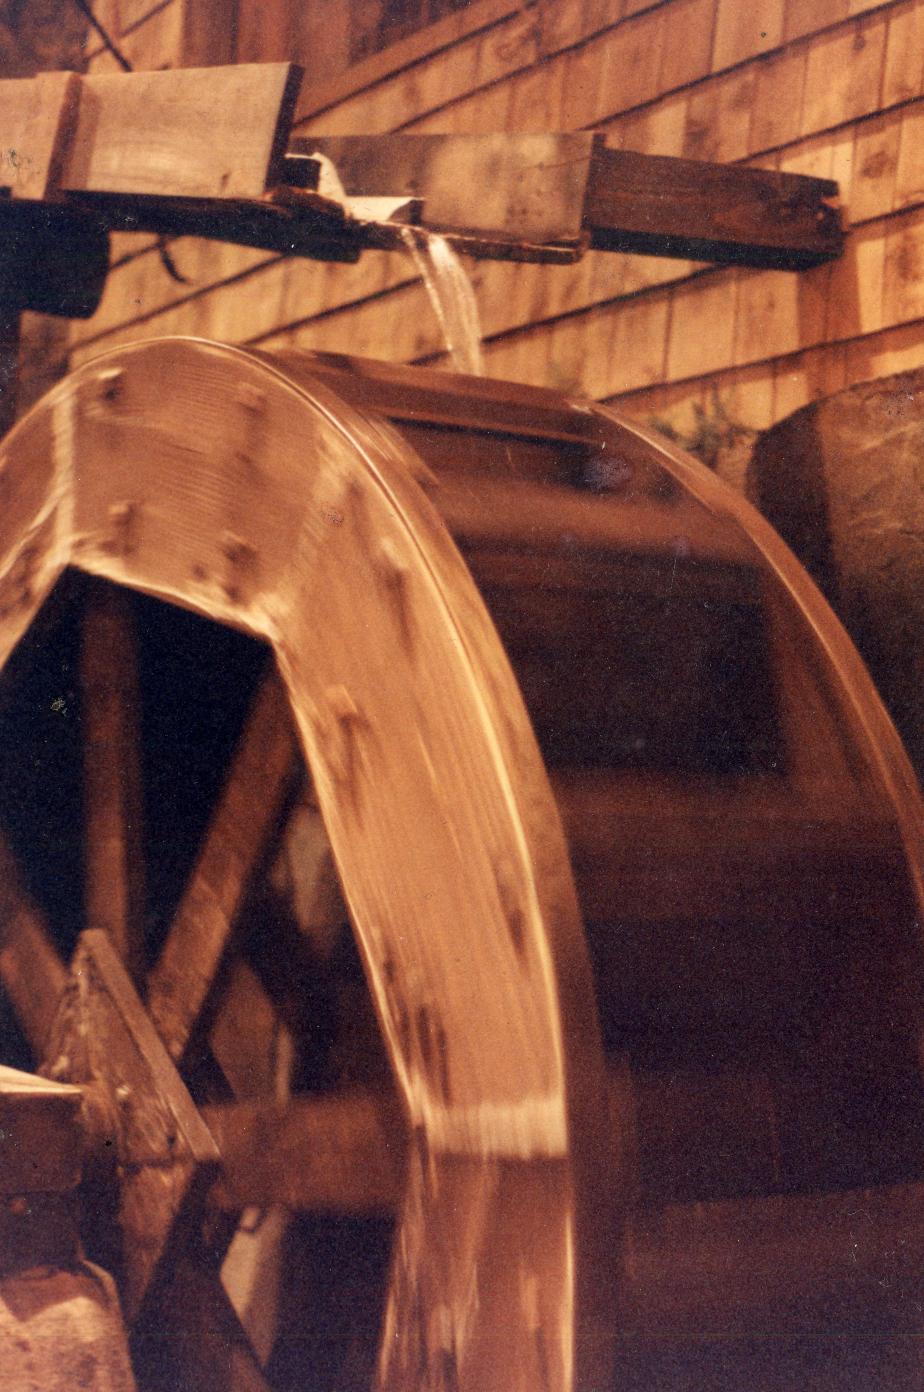 Grist Mill Water Wheel - Heritage New Hampshire - Glen NH